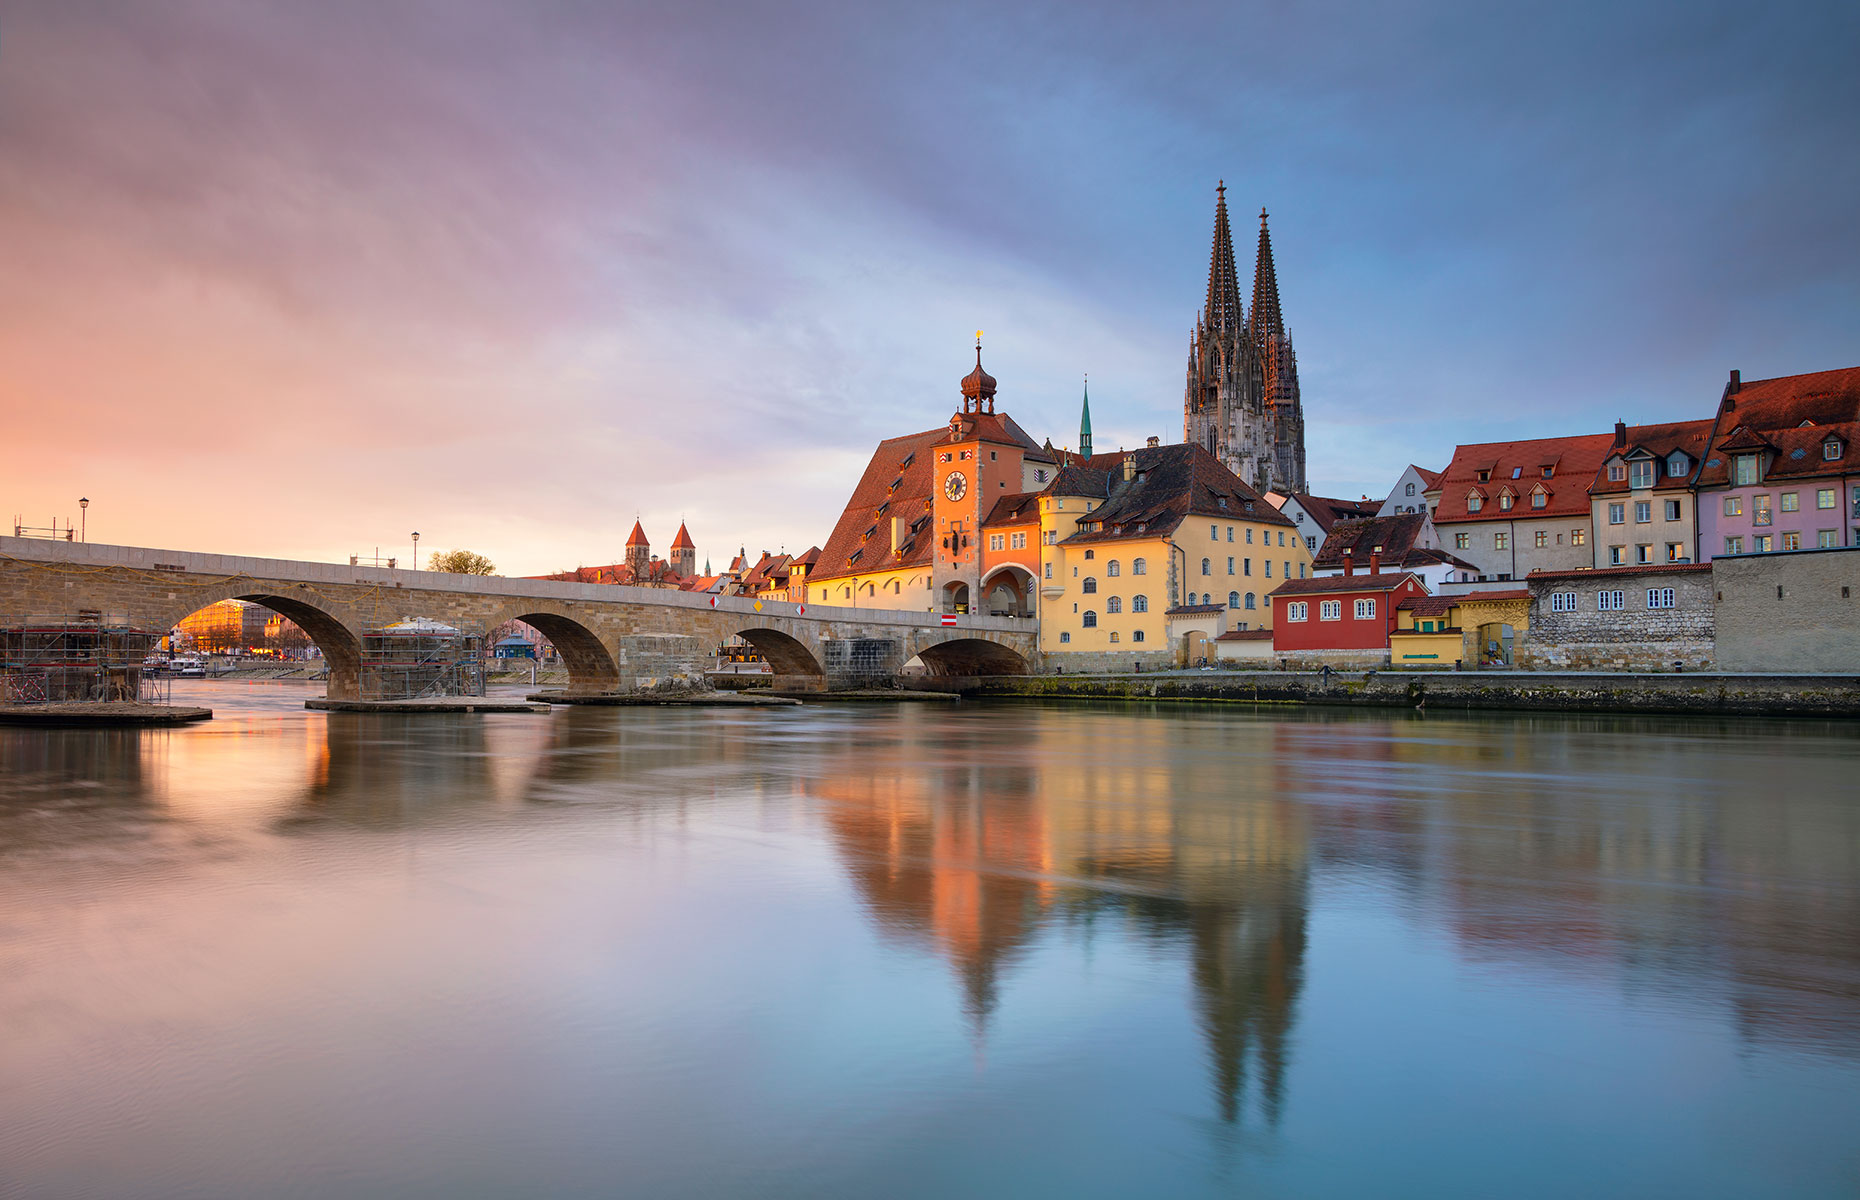 Regensburg, Germany, and its stone bridge is a regular stop on a river cruise along the Danube (Image: Rudy Balasko/Shutterstock)